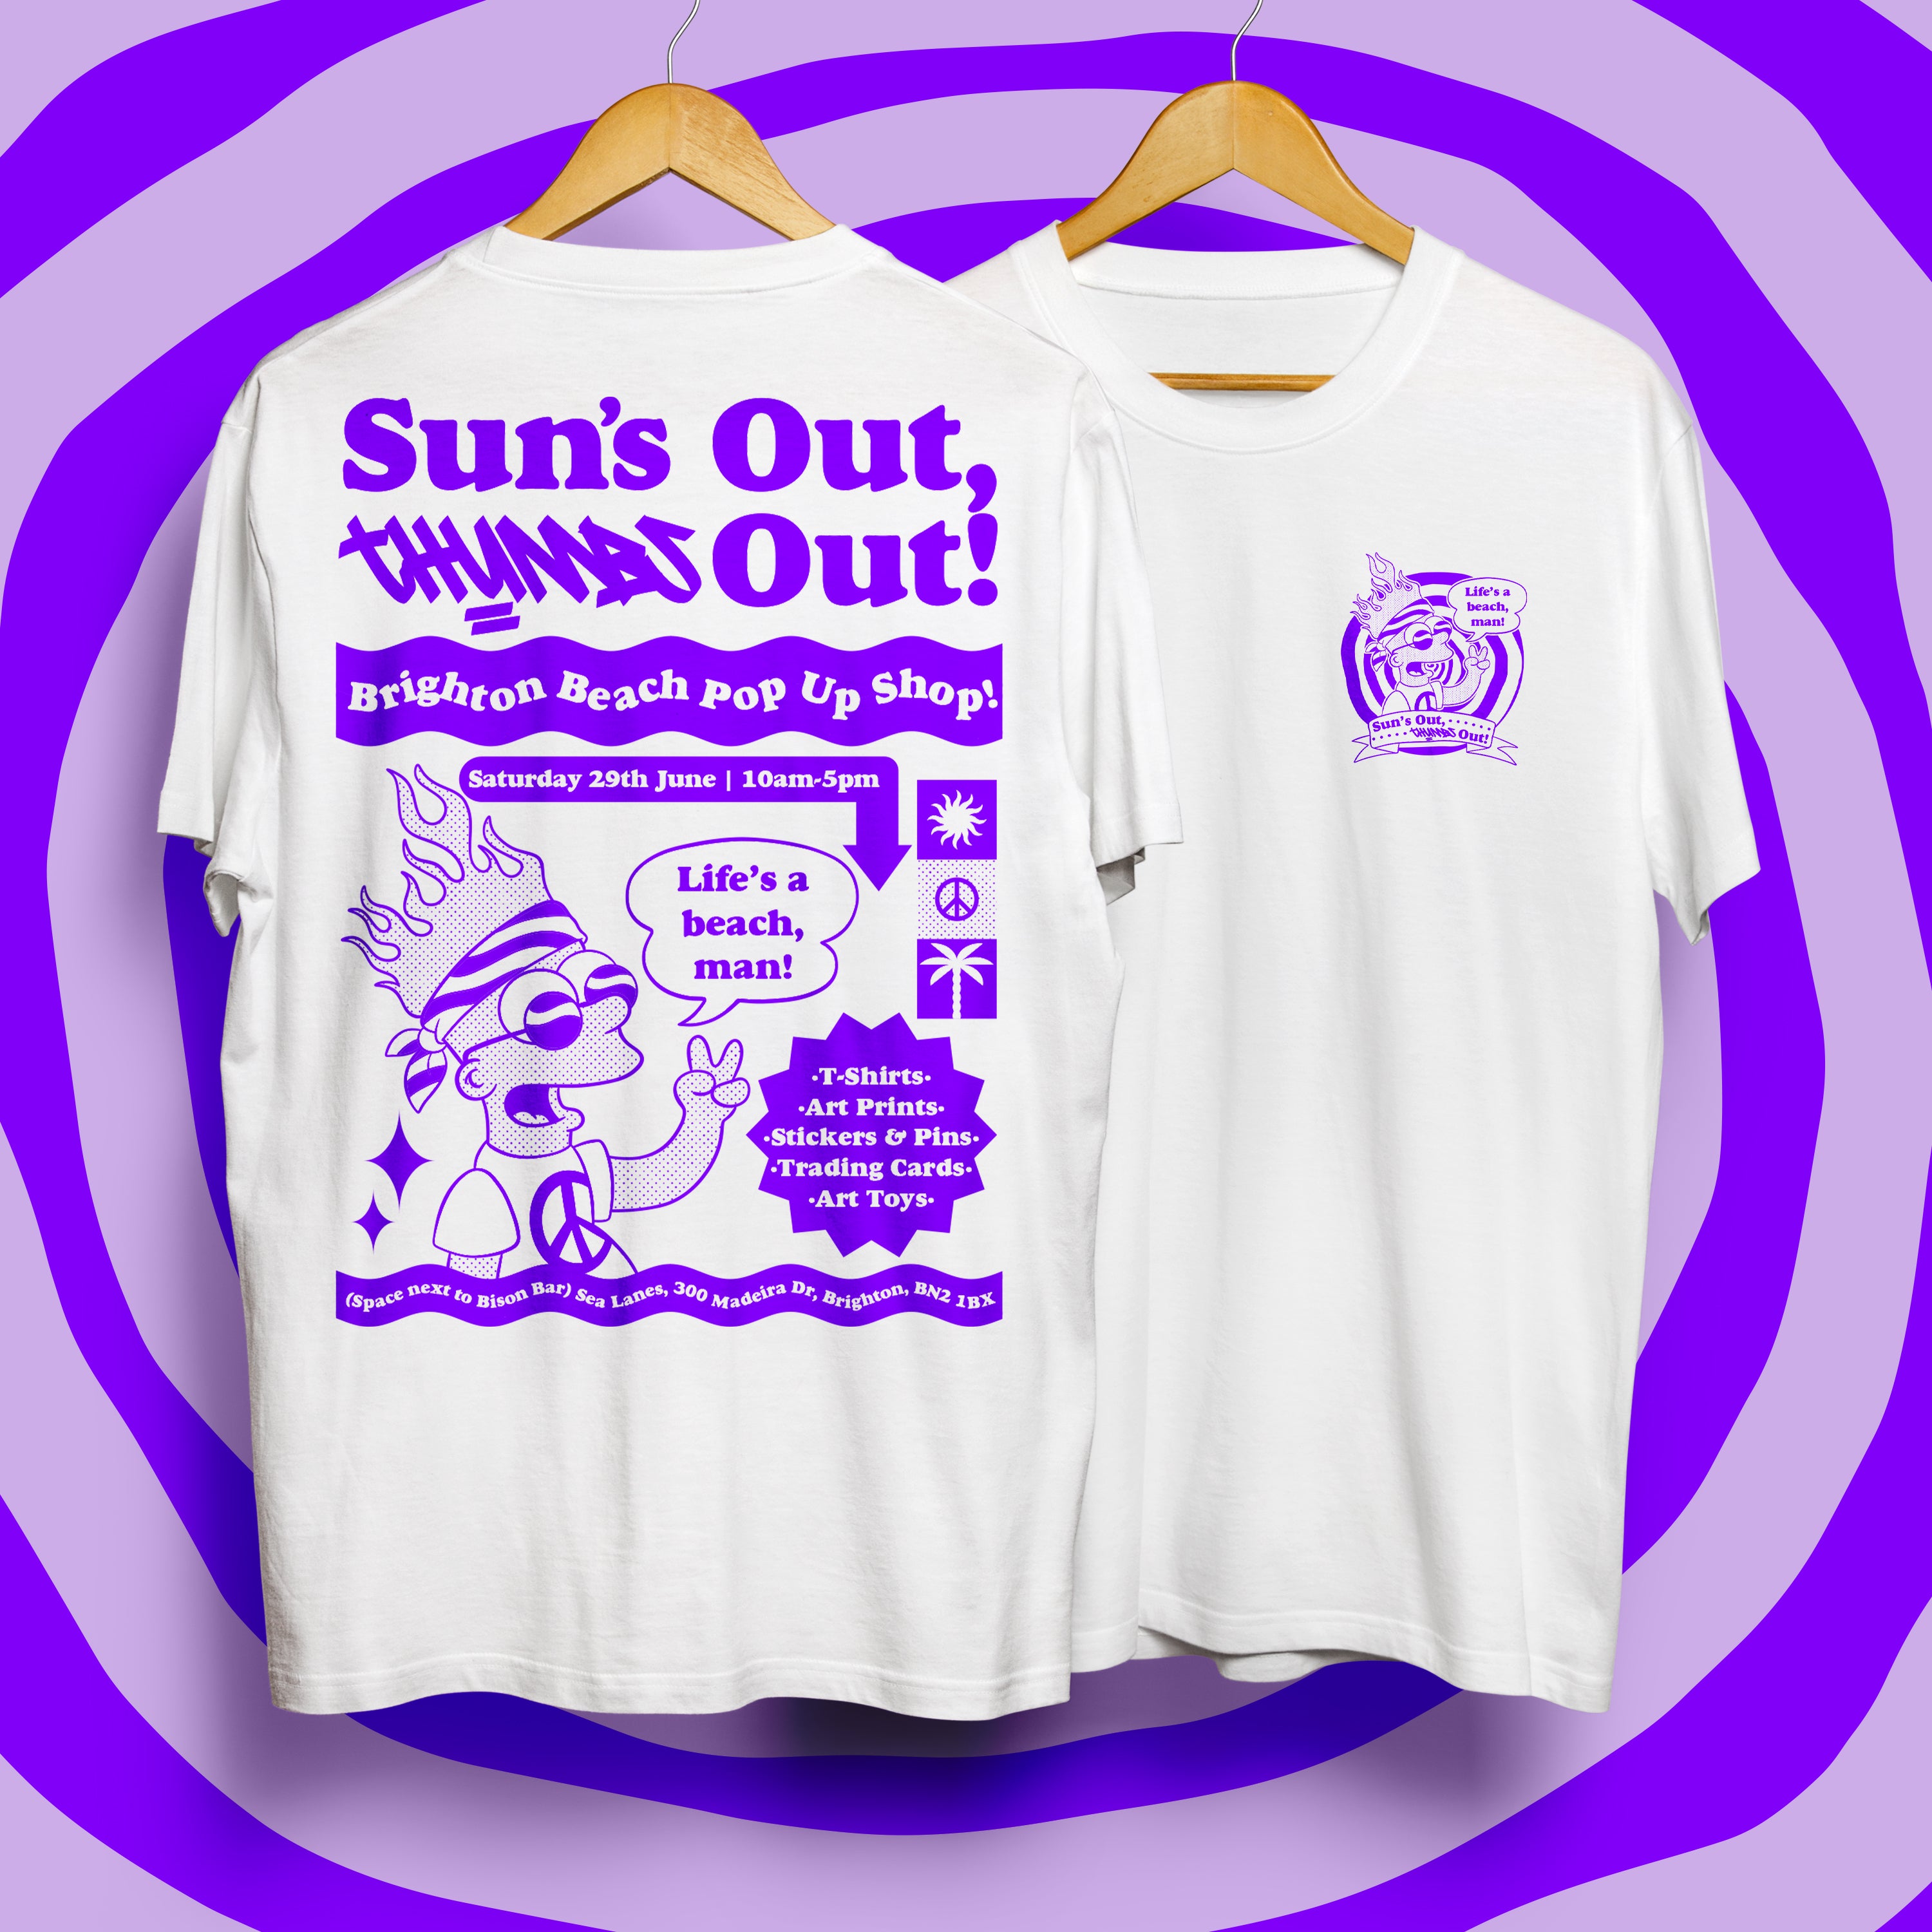 Sun's Out, Thumbs Out T-Shirt